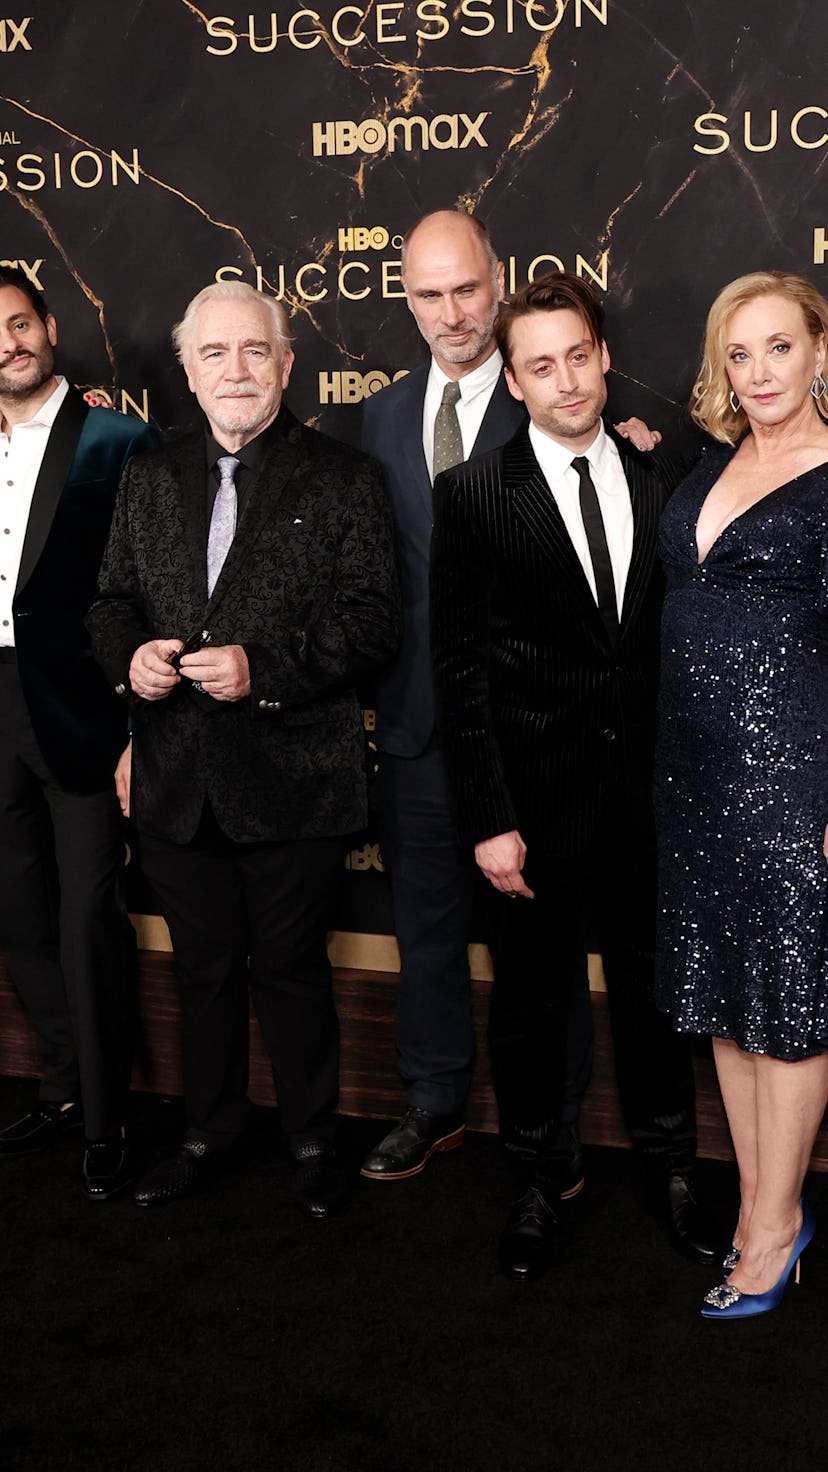 Succession cast on the red carpet for the season 3 premiere